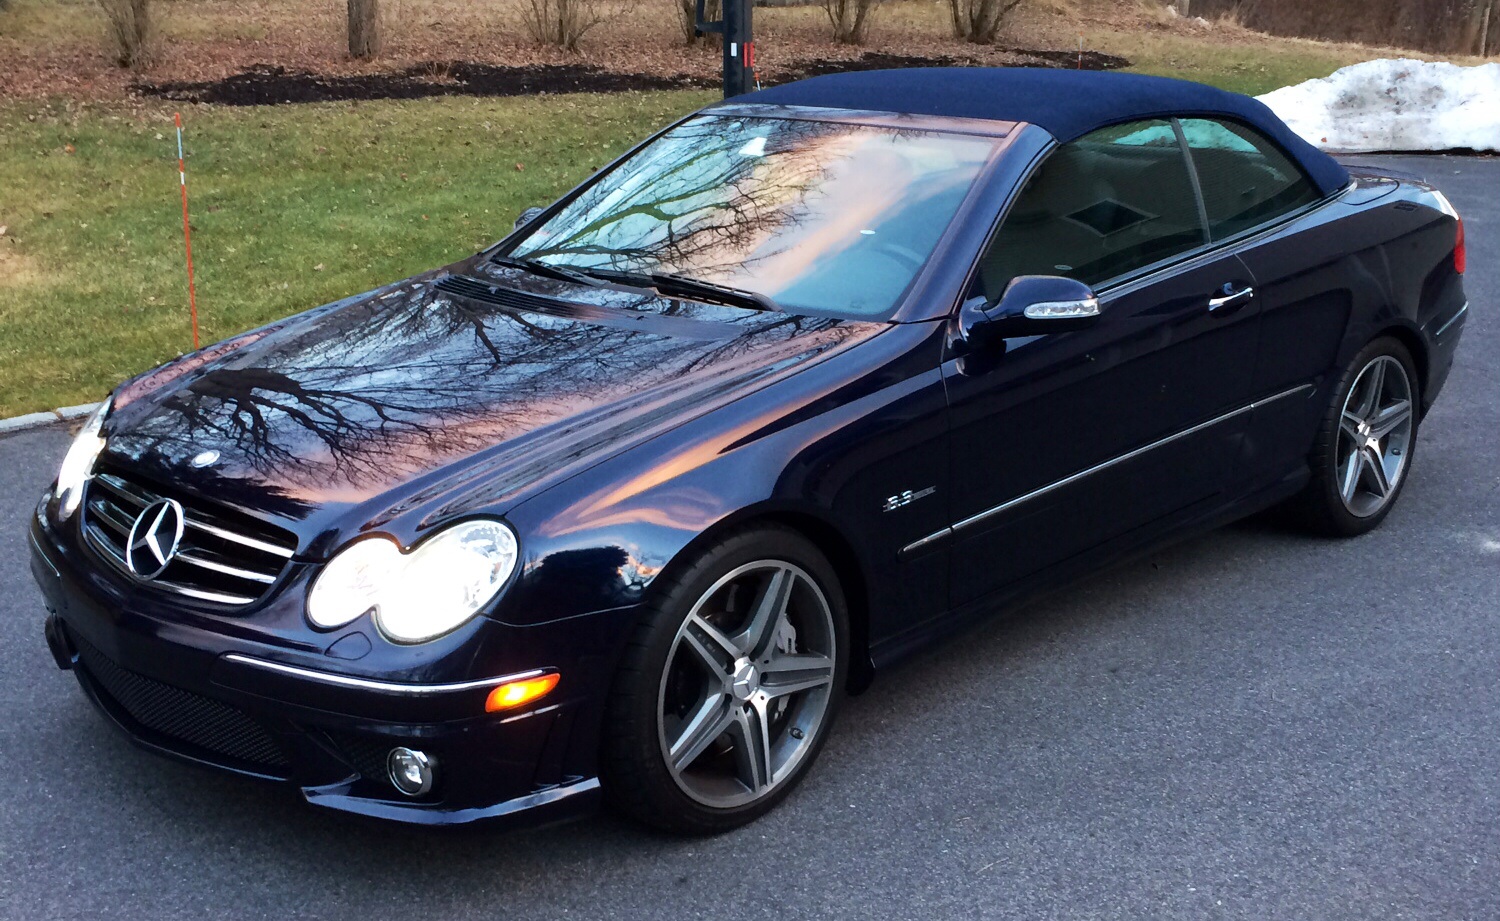 CLK63 Convertible a female looking car? - Page 2 -  Forums